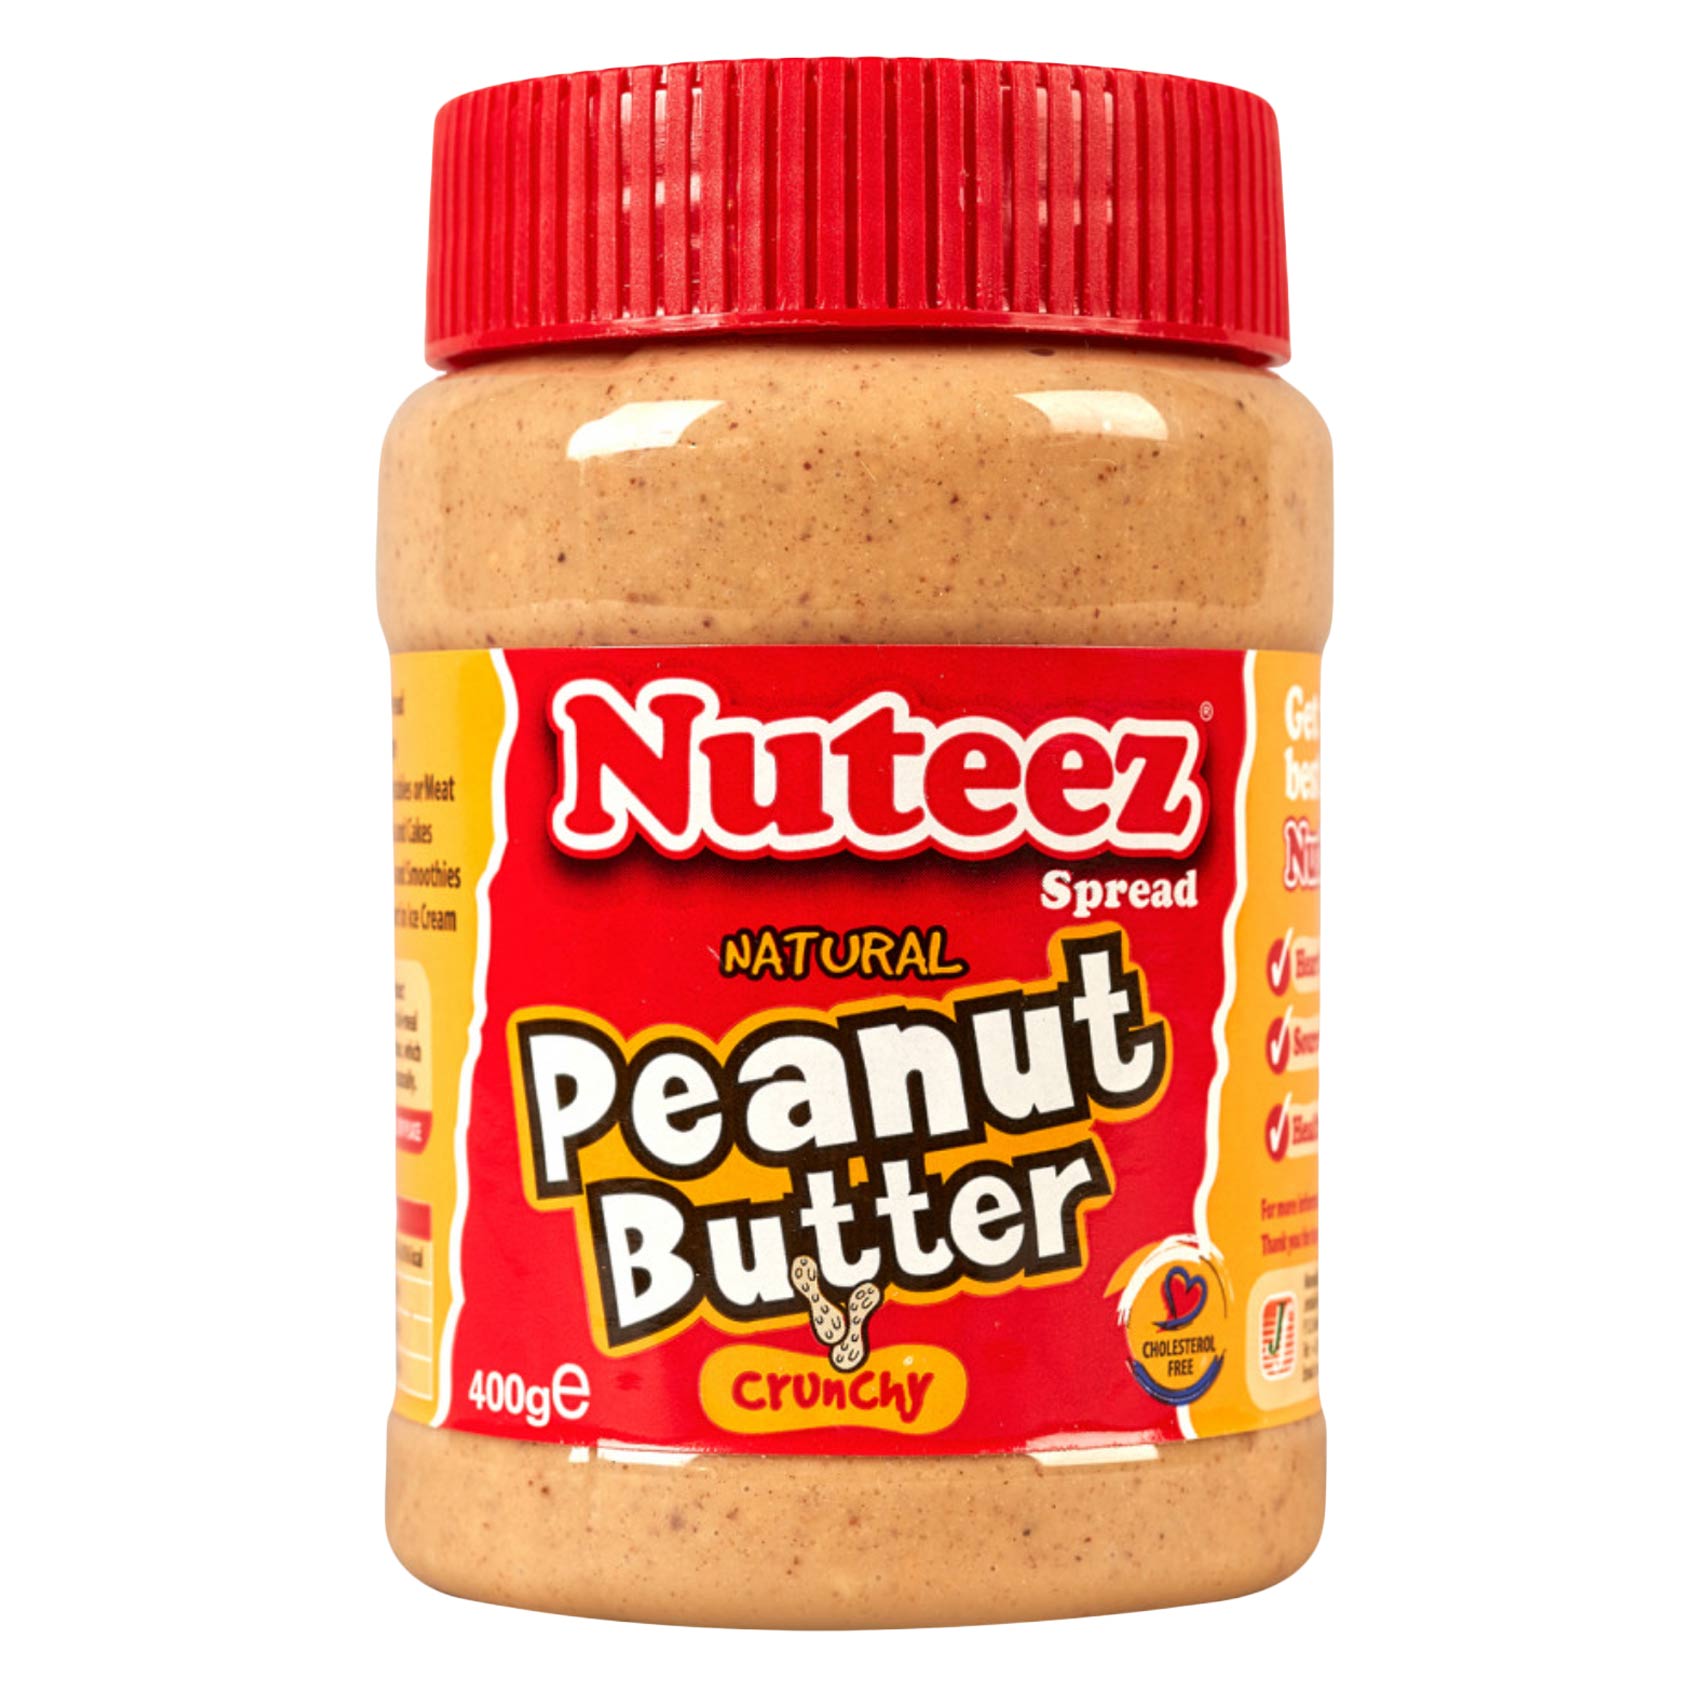 Nuteez Natural Crunchy Peanut Butter 400g